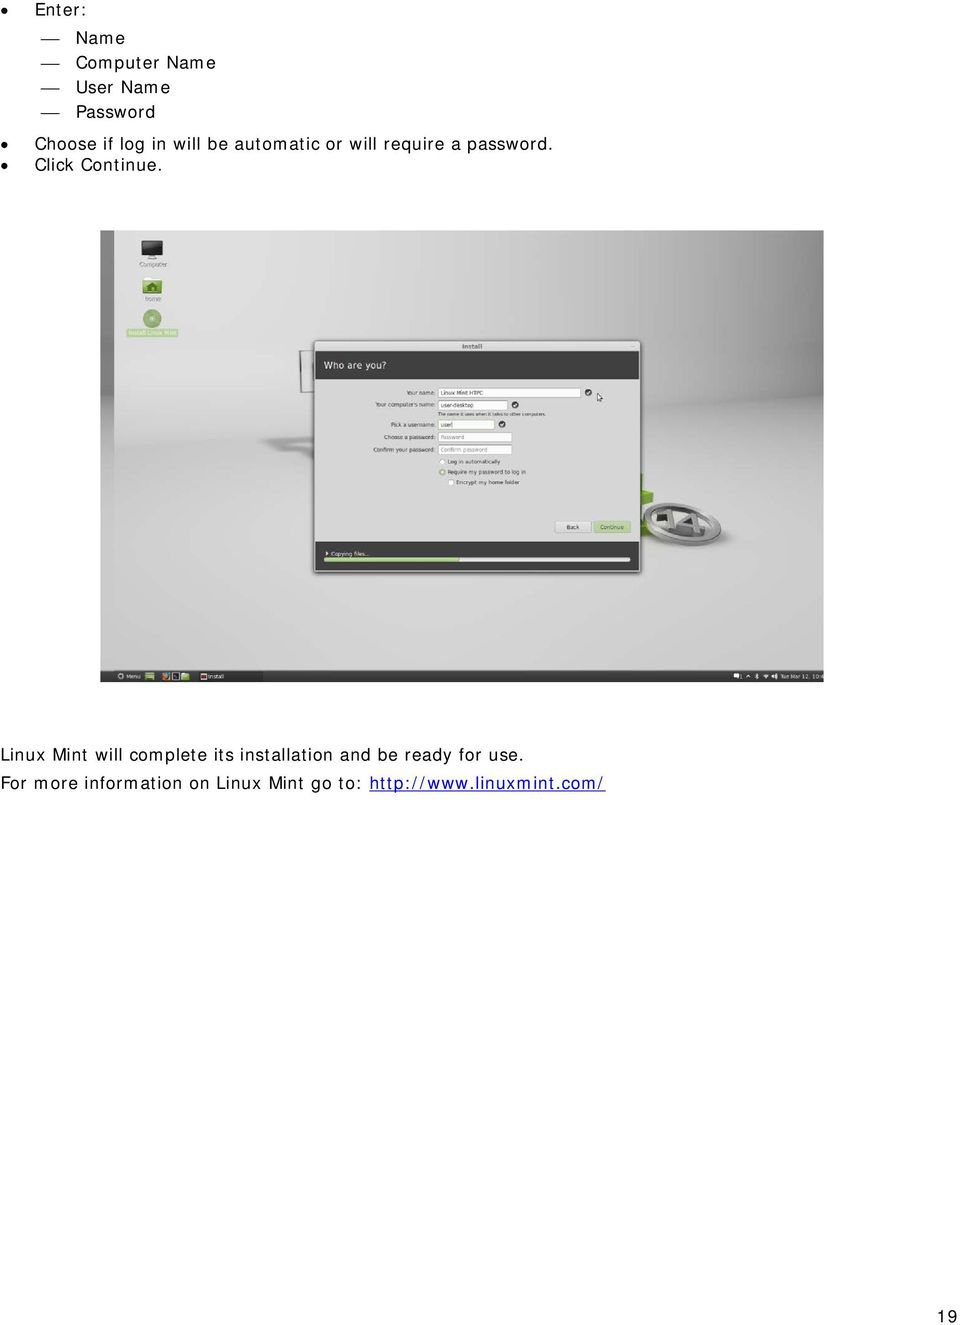 Linux Mint will complete its installation and be ready for use.